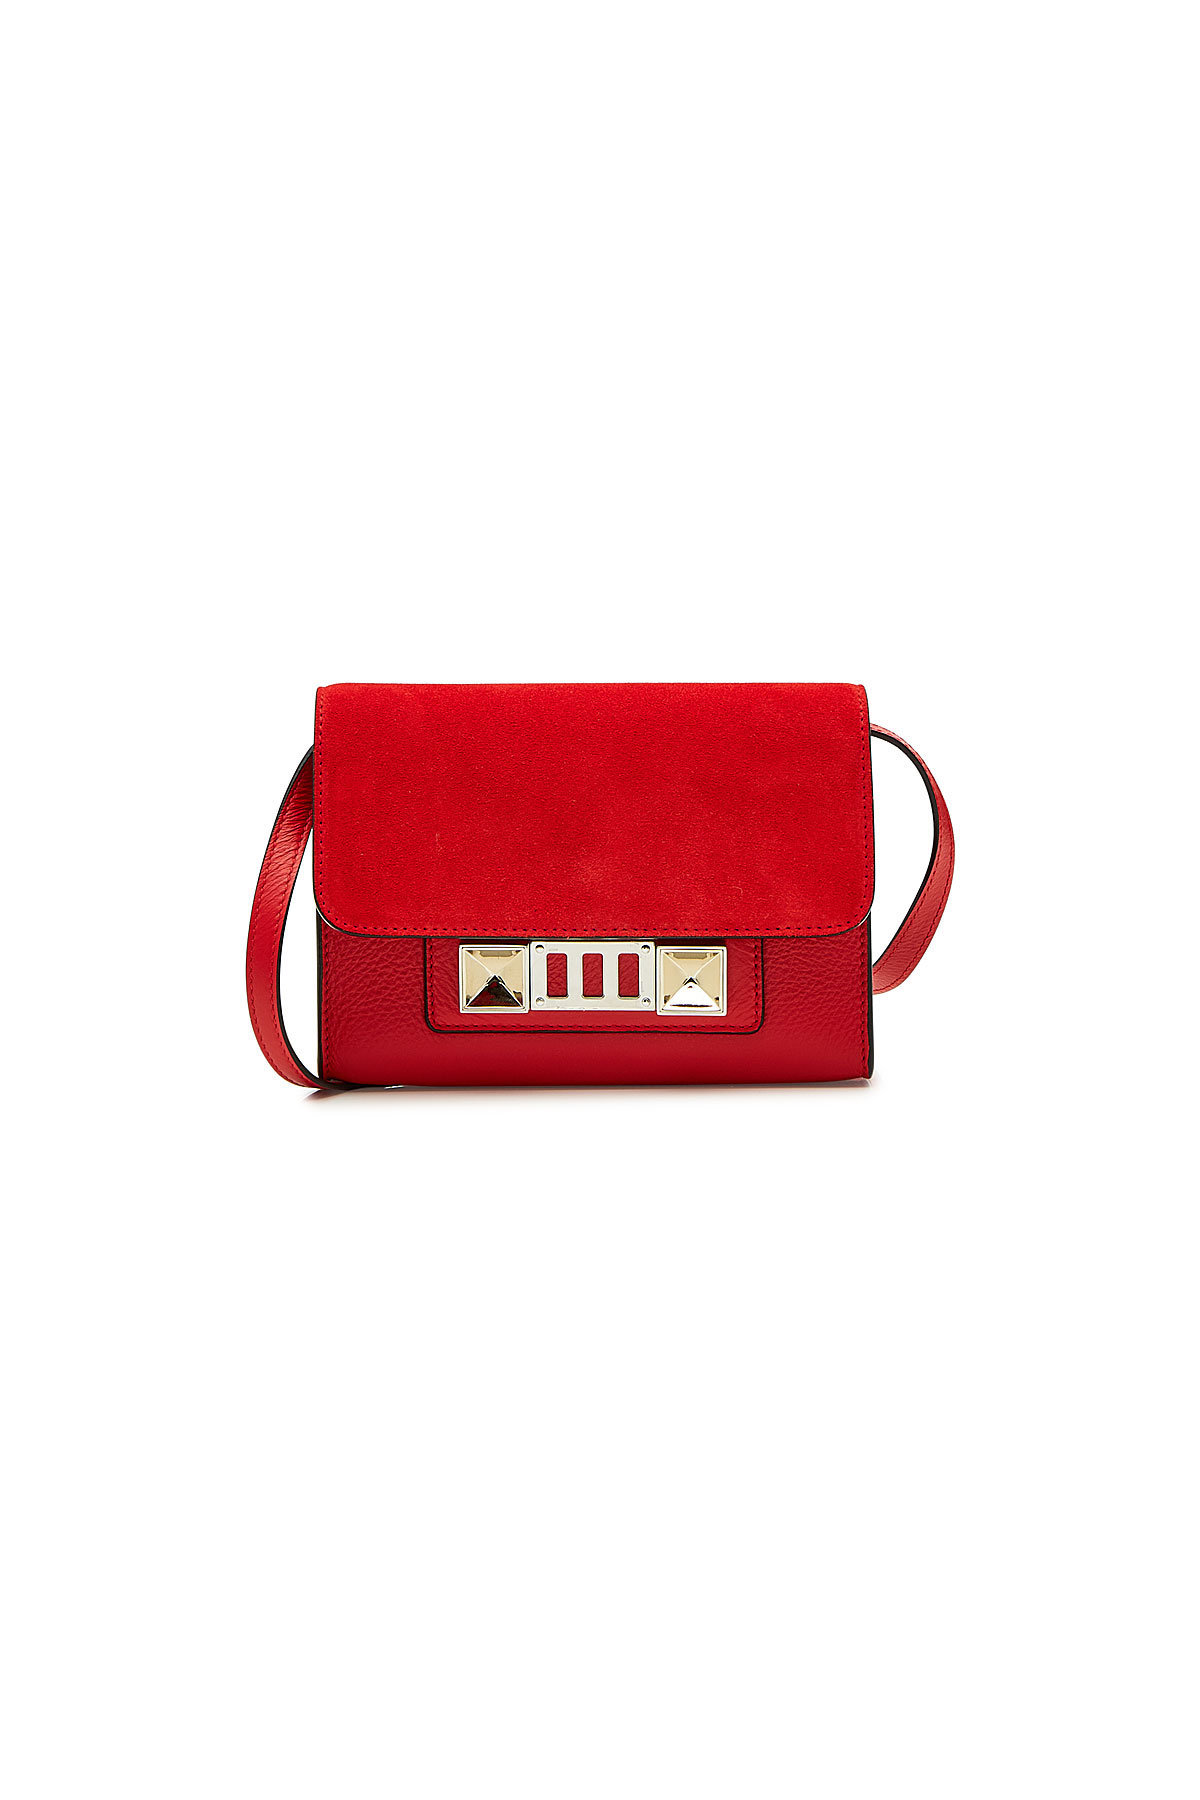 Proenza Schouler - PS11 Suede Wallet on Strap with Leather